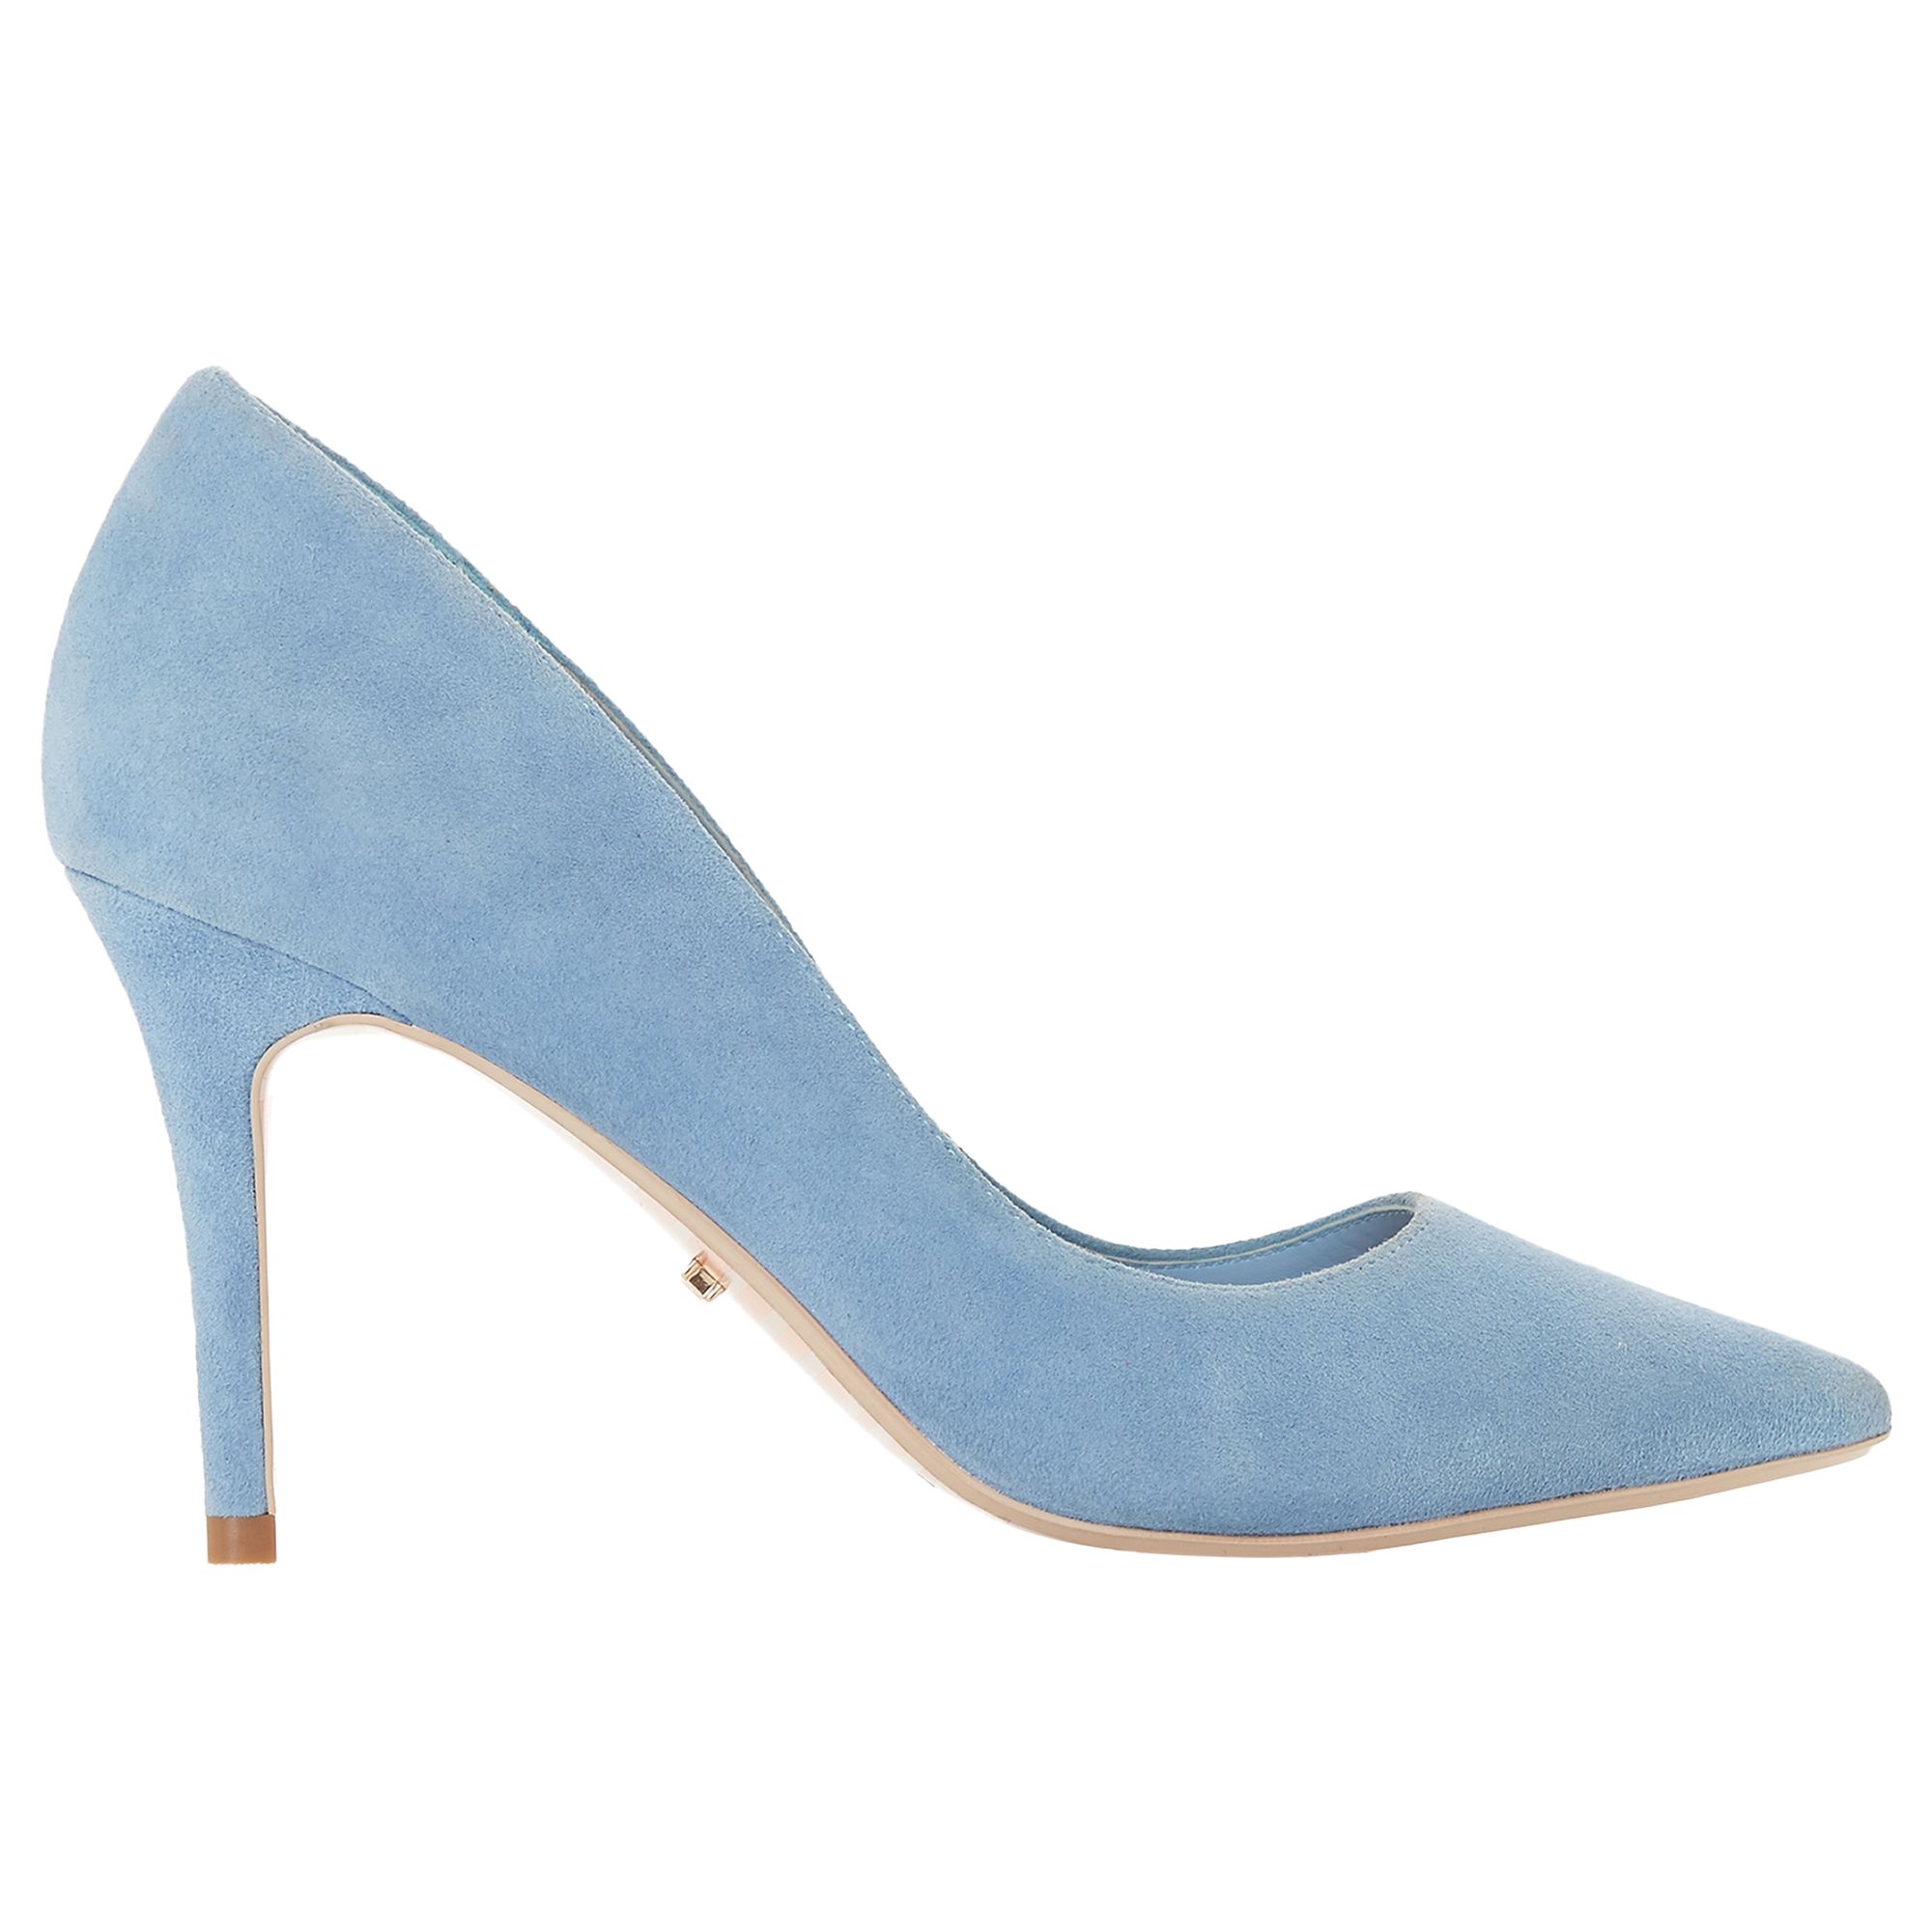 Dune Aurrora Pointed Toe Court Shoes, Blue Suede, 3